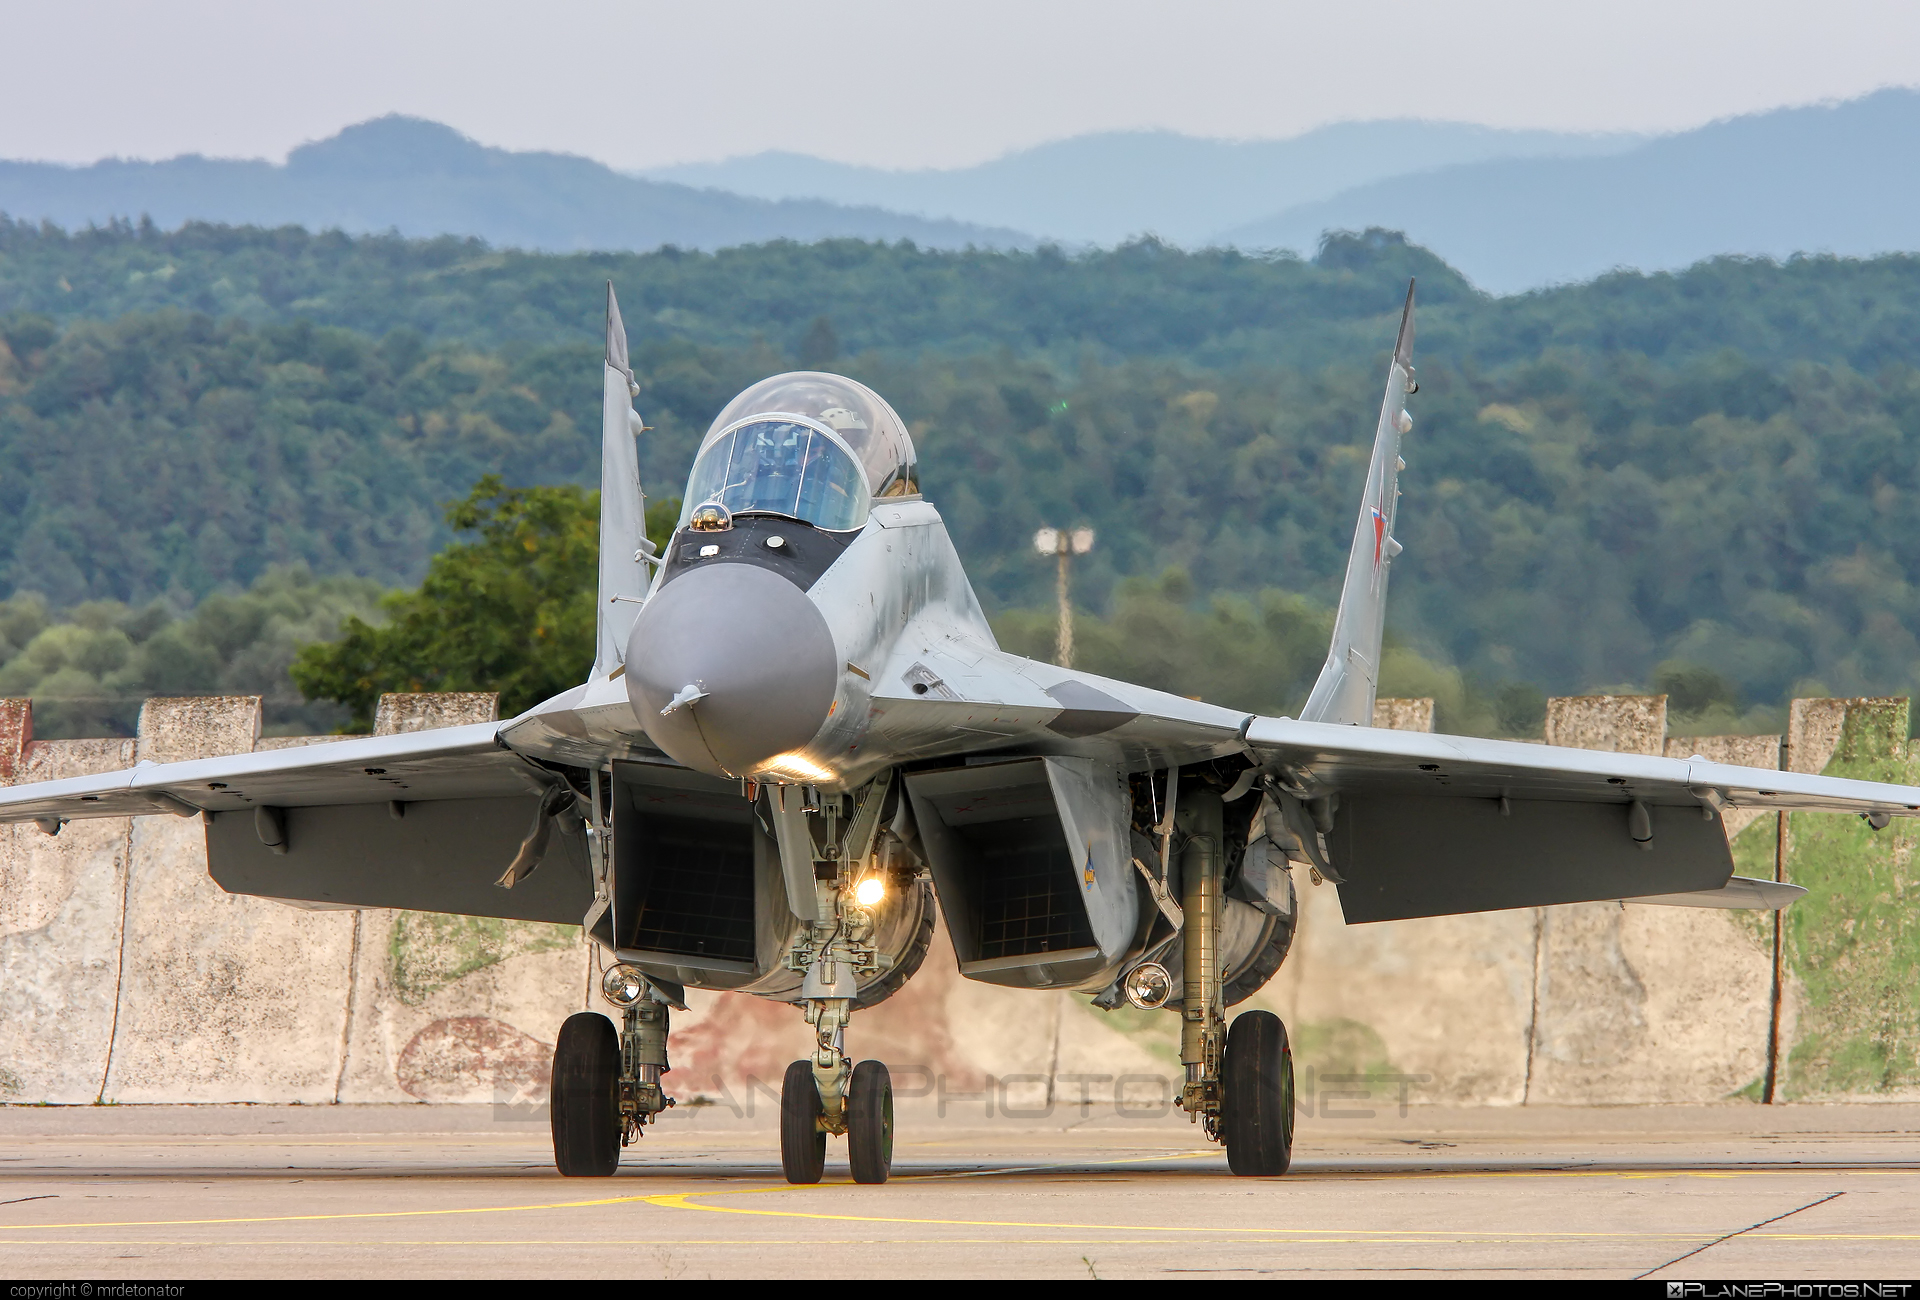 Mikoyan-Gurevich MiG-29M2 - 747 operated by RSK MiG #mig #mig29 #mig29m2 #mikoyangurevich #rskmig